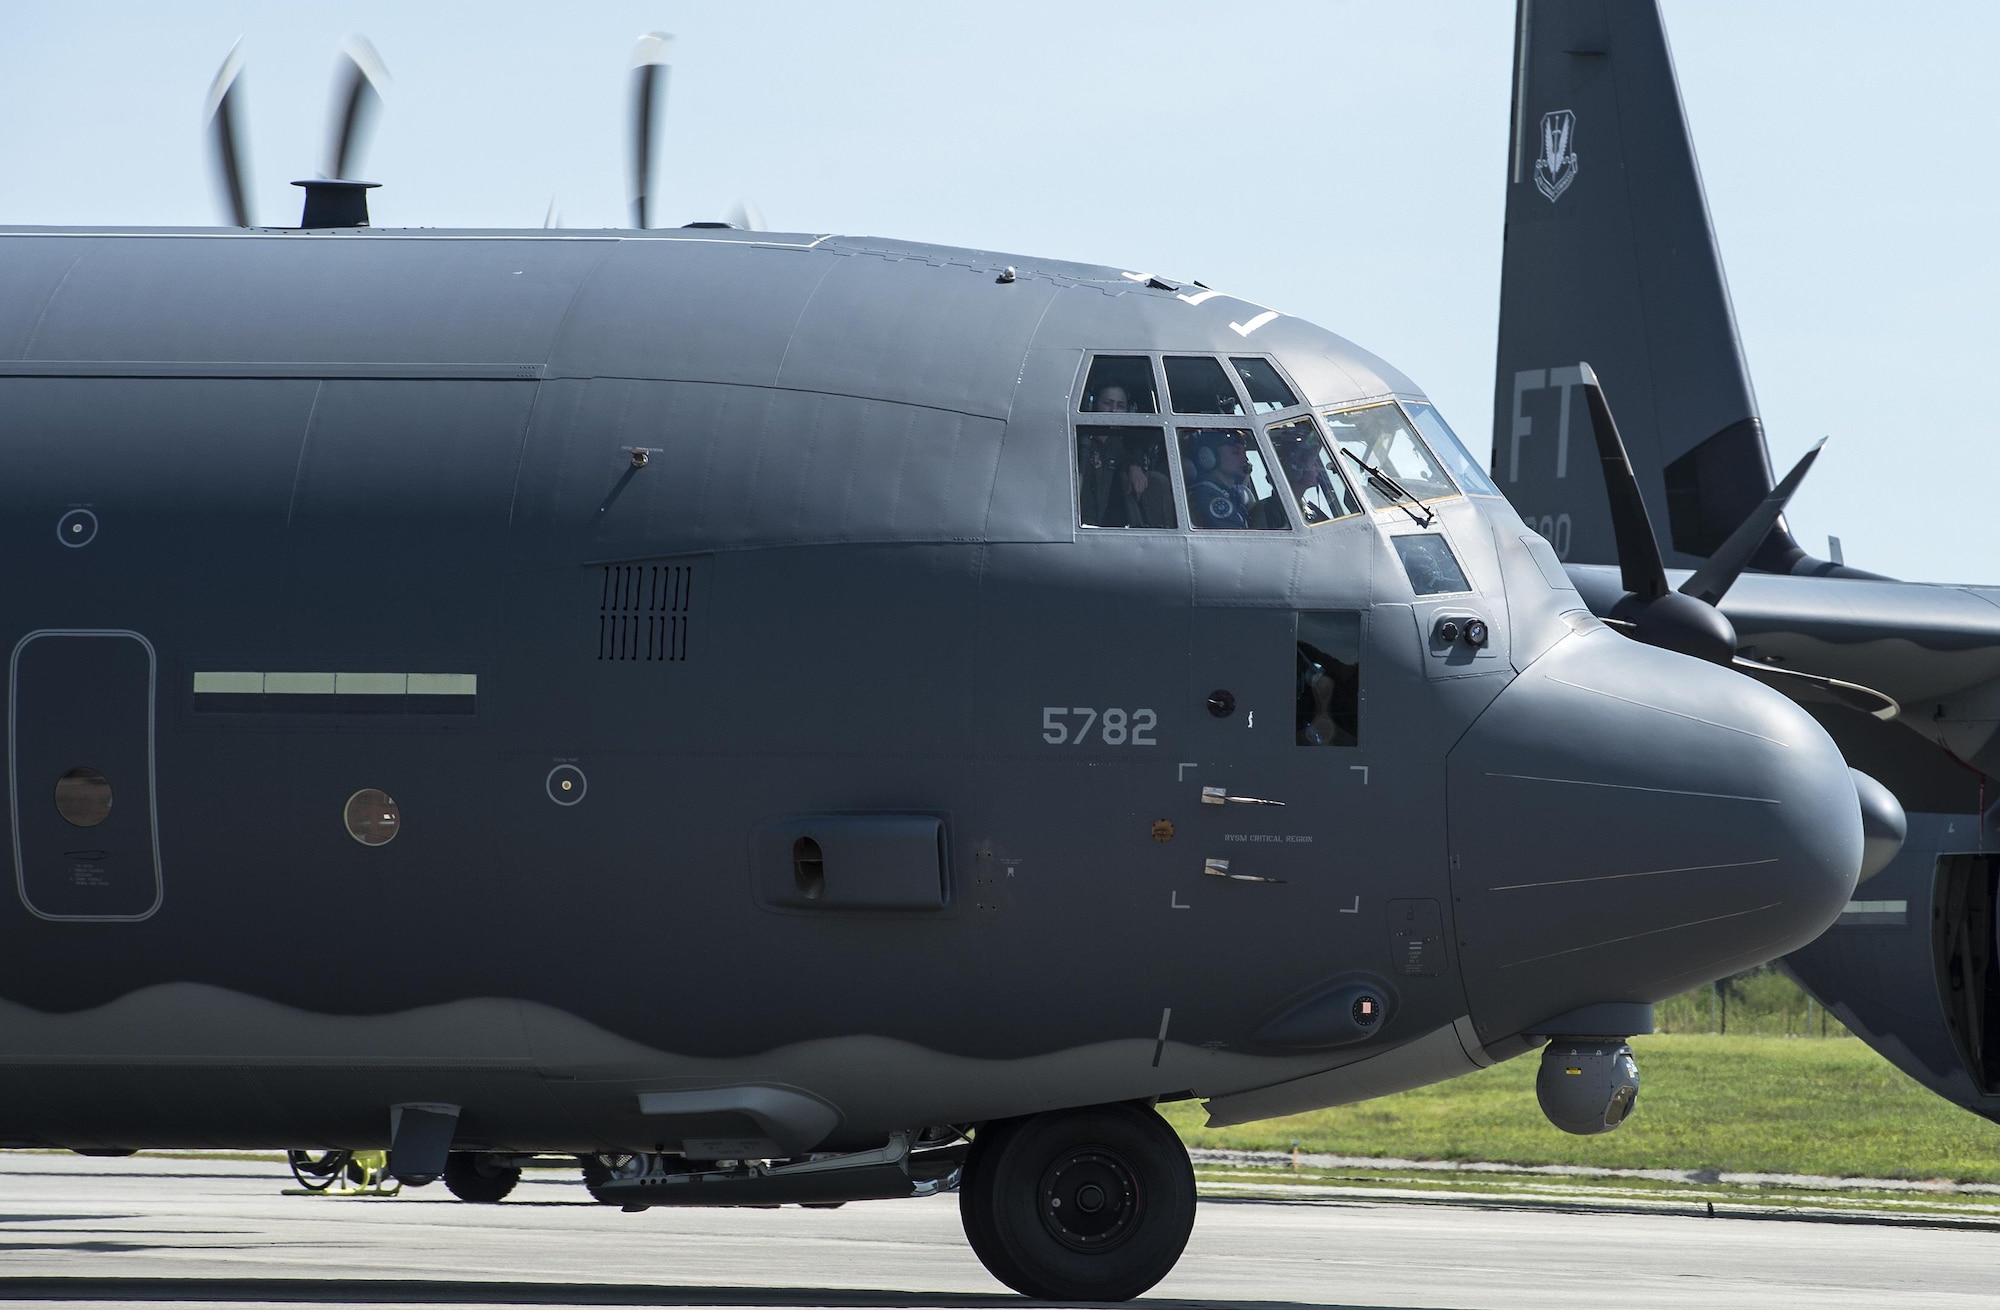 U.S. Air Force Capt. Christy Wise, 71st Rescue Squadron HC-130J Combat King II pilot, taxis onto the runway during a requalification flight, July 22, 2016, at Moody Air Force Base, Ga. Wise made her mark in Air Force history by becoming the sixth amputee to return to the skies. (U.S. Air Force photo by Airman 1st Class Janiqua P. Robinson)